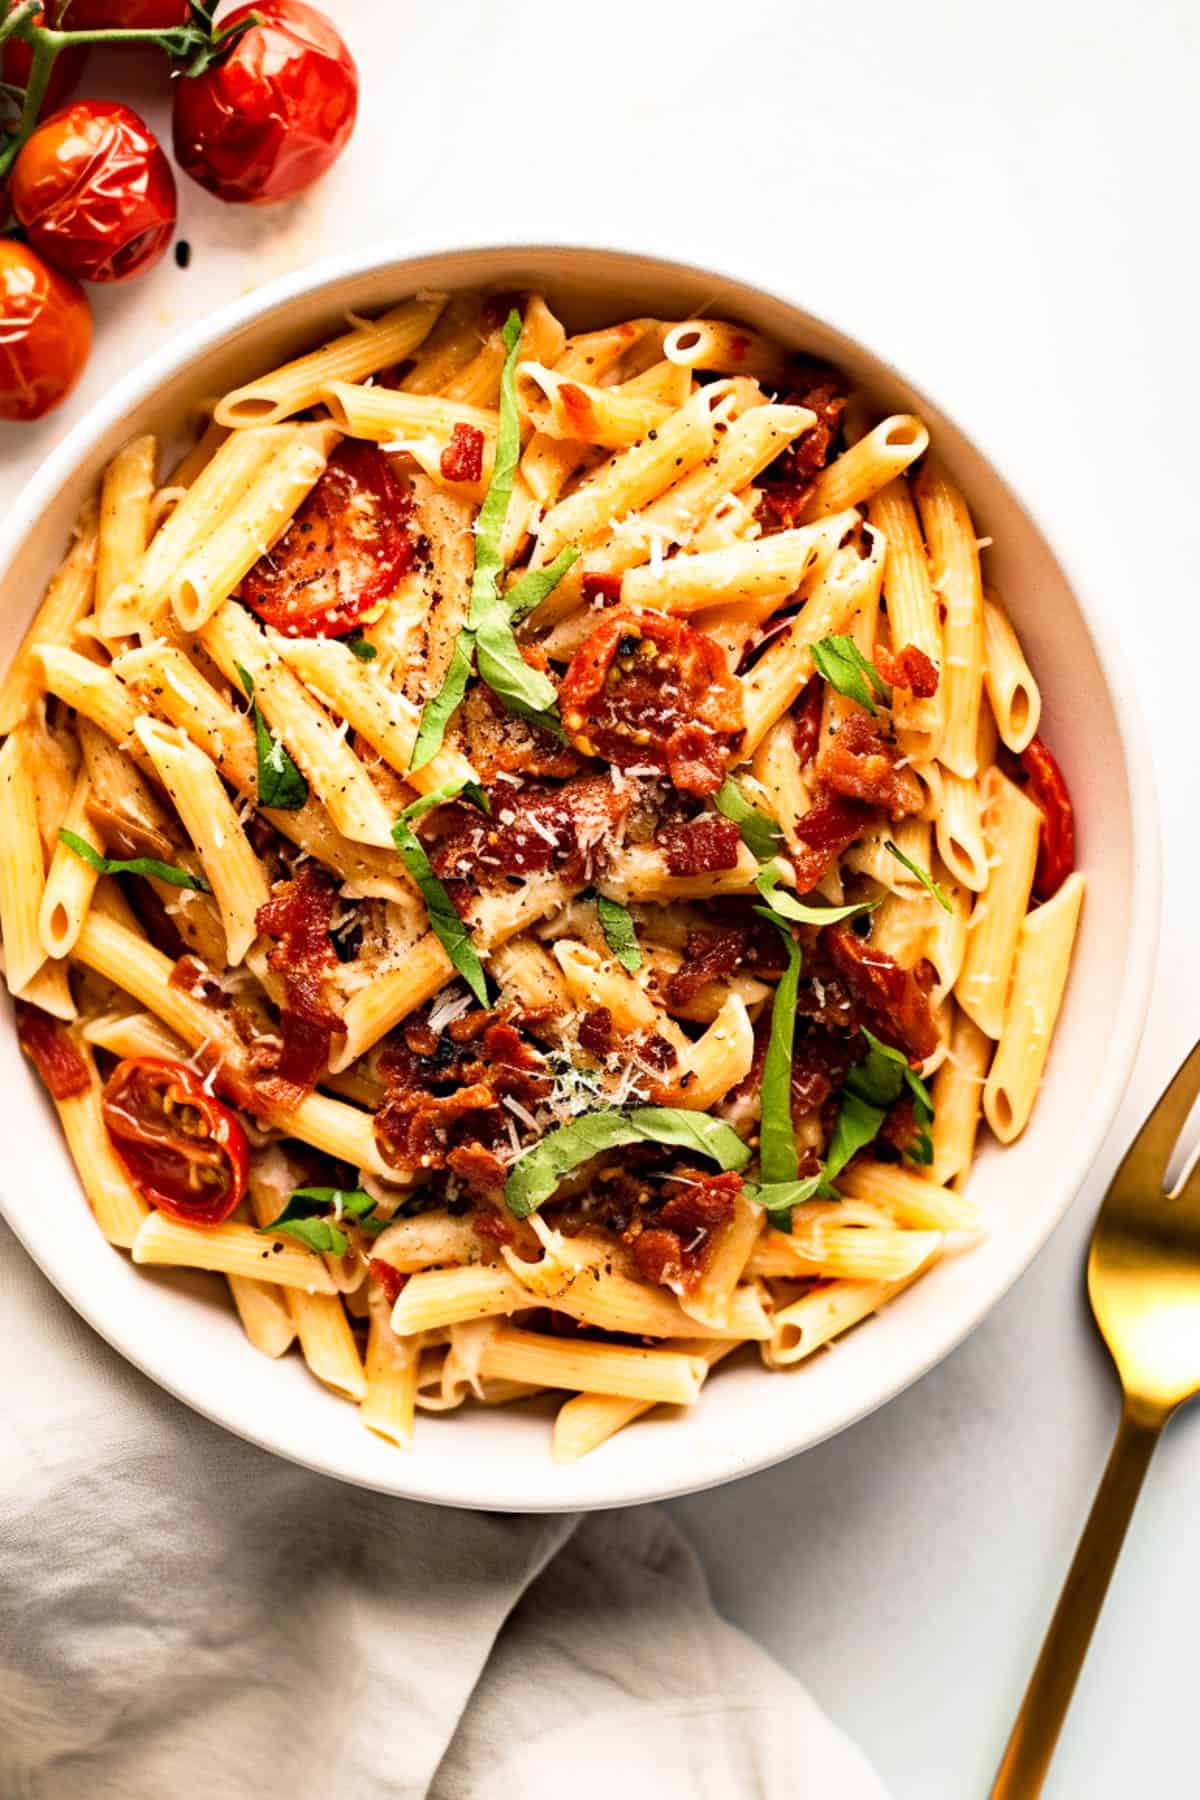 Sun-dried tomato pasta in a bowl with chopped basil and parmesan cheese.